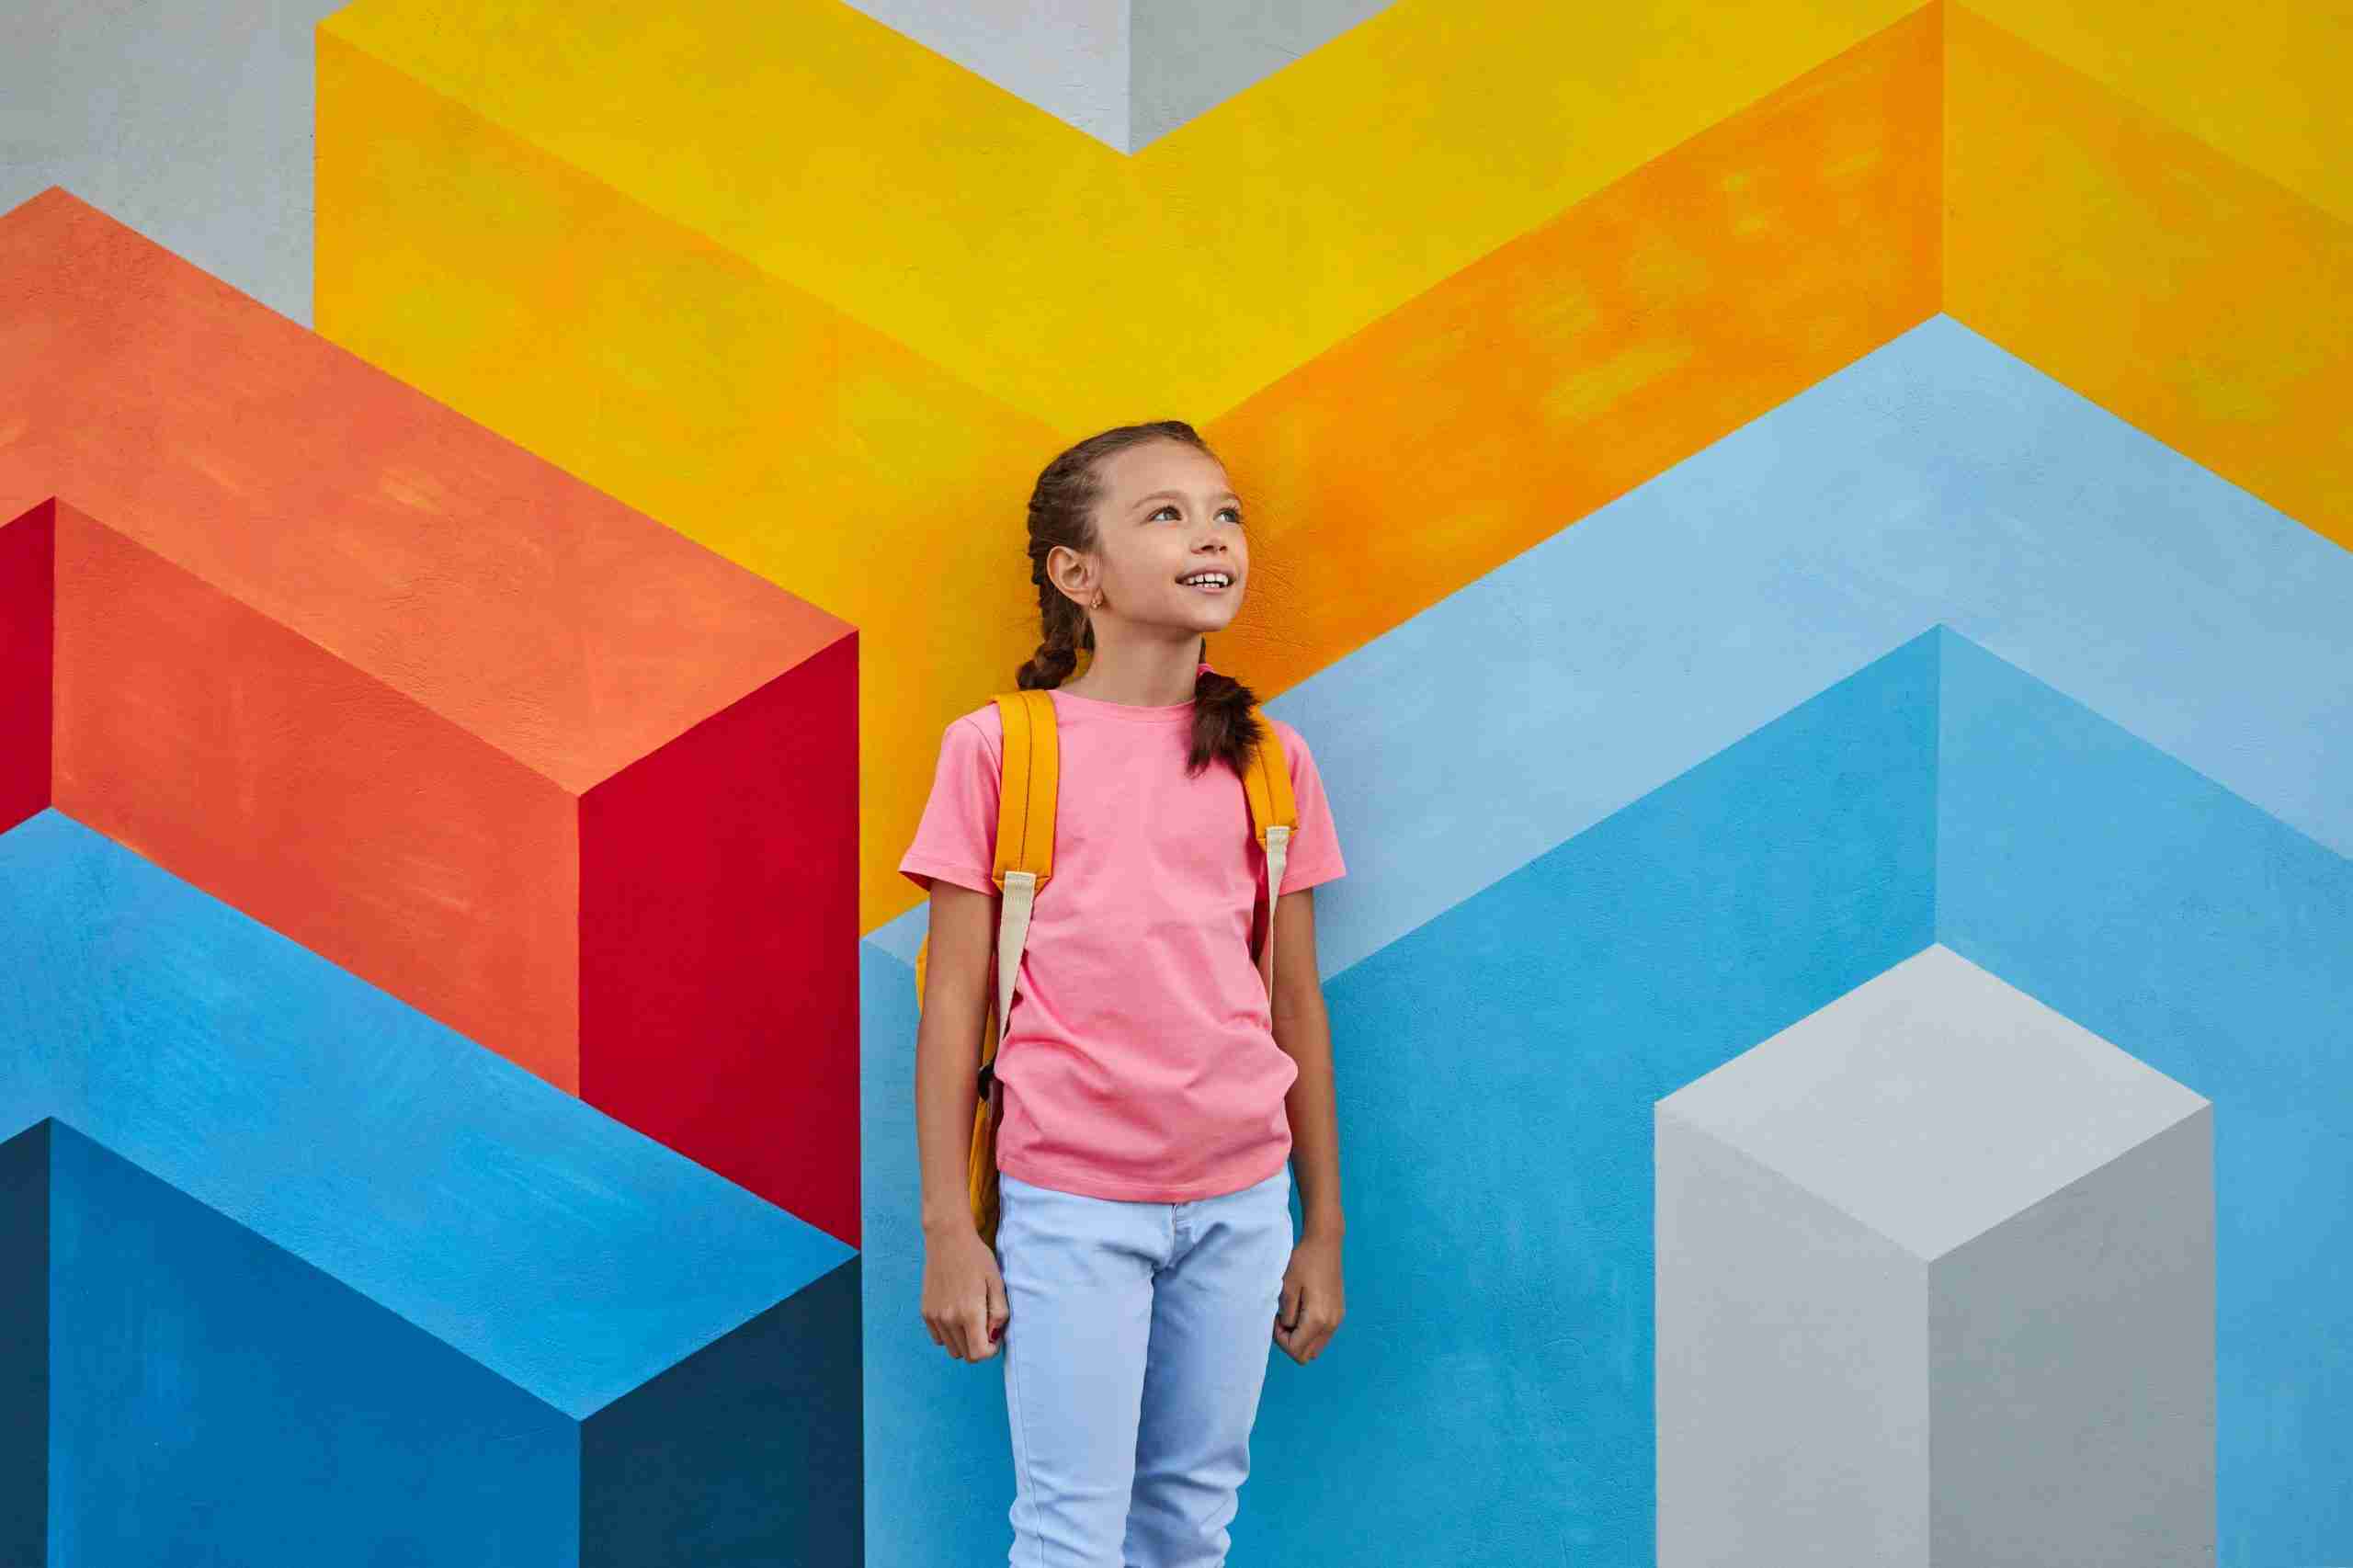 Cheerful schoolgirl against colorful wall 2022 11 23 00 45 11 utc scaled | mobile home living